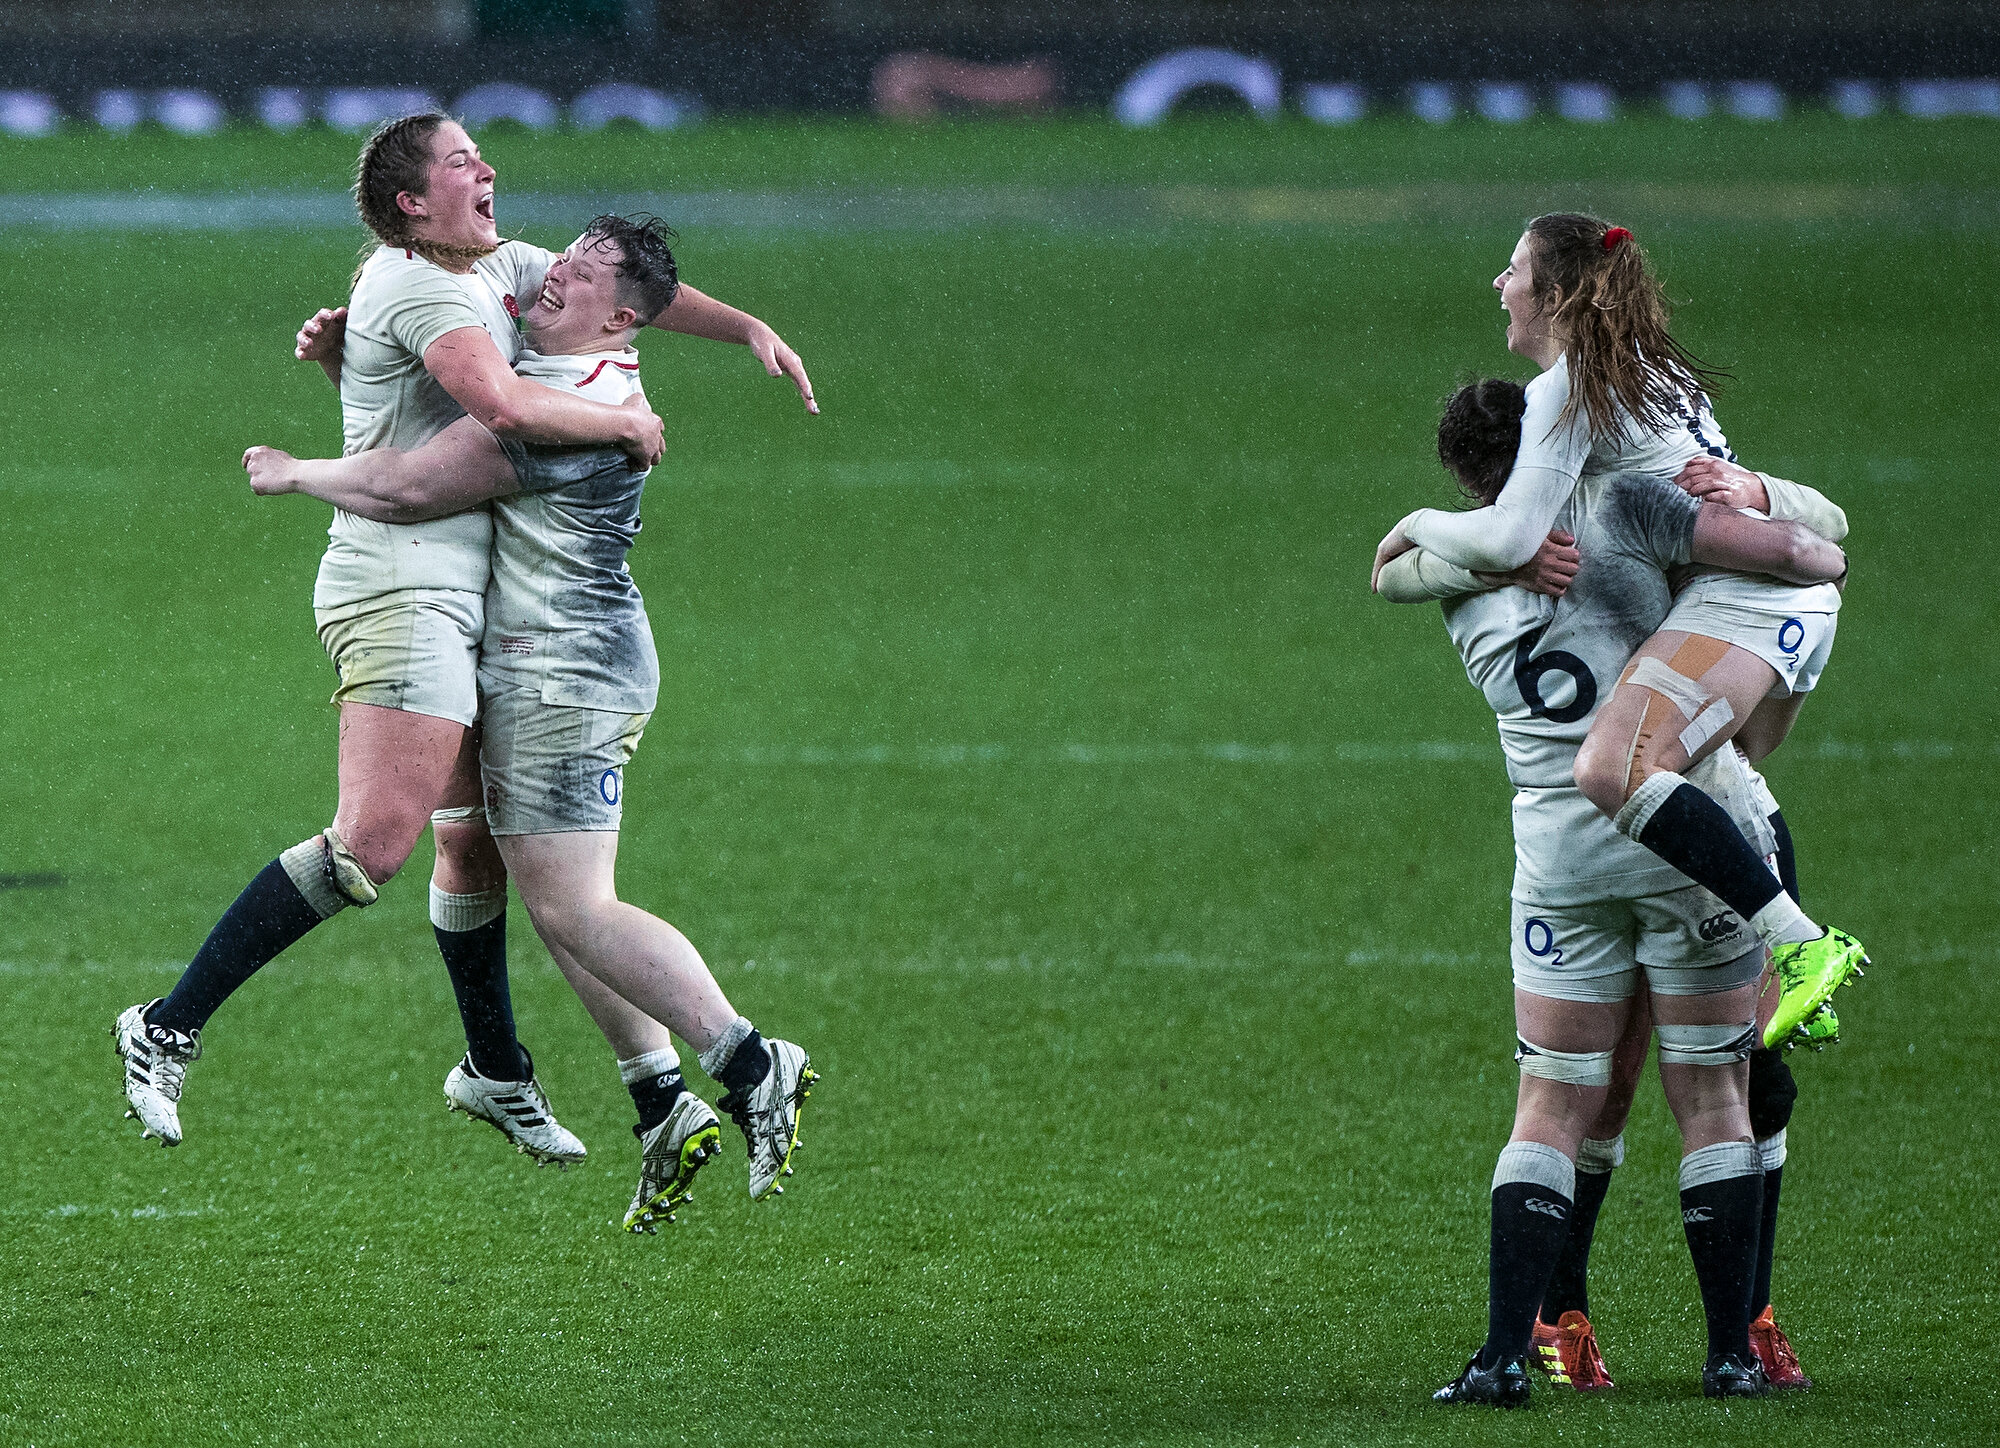  England players celebrate beating Scotland to complete their win in the Six Nations tournament at Twickenham Stadium in London. Photo: Eddie Keogh, 16 March 2019 